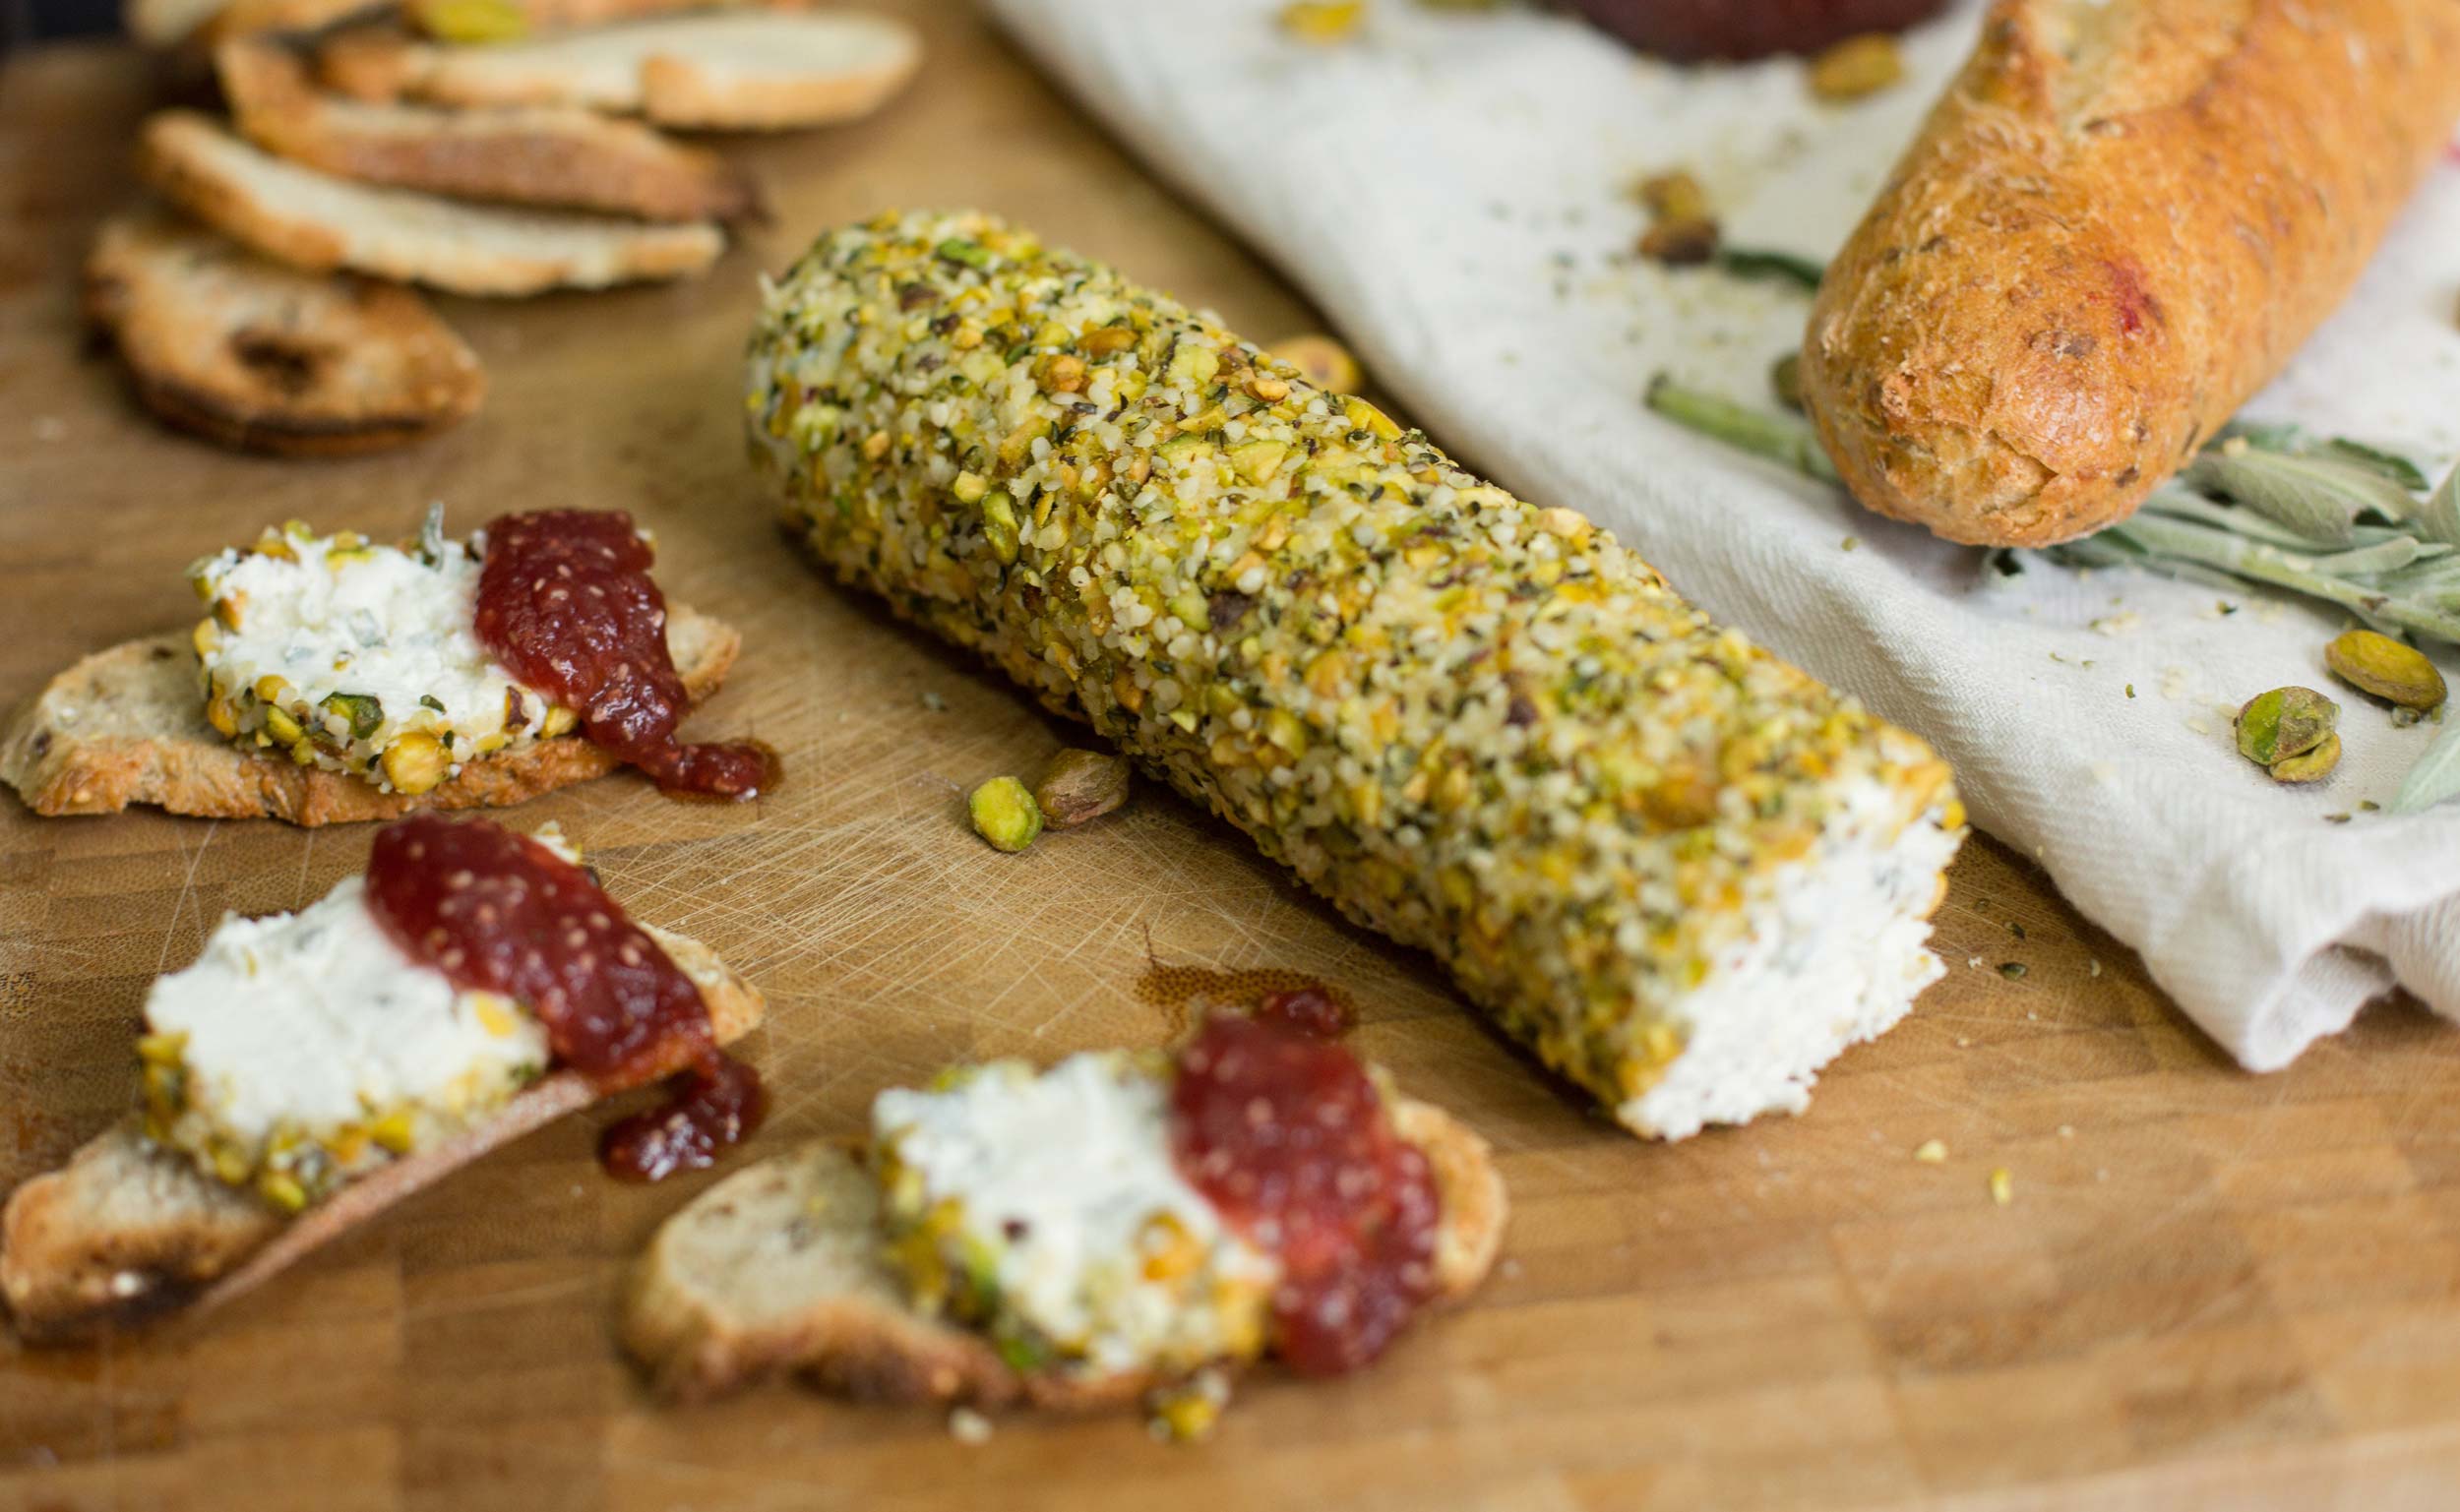 Crusted Goats Cheese With Chia Seeds From Peace Naturals Foods.